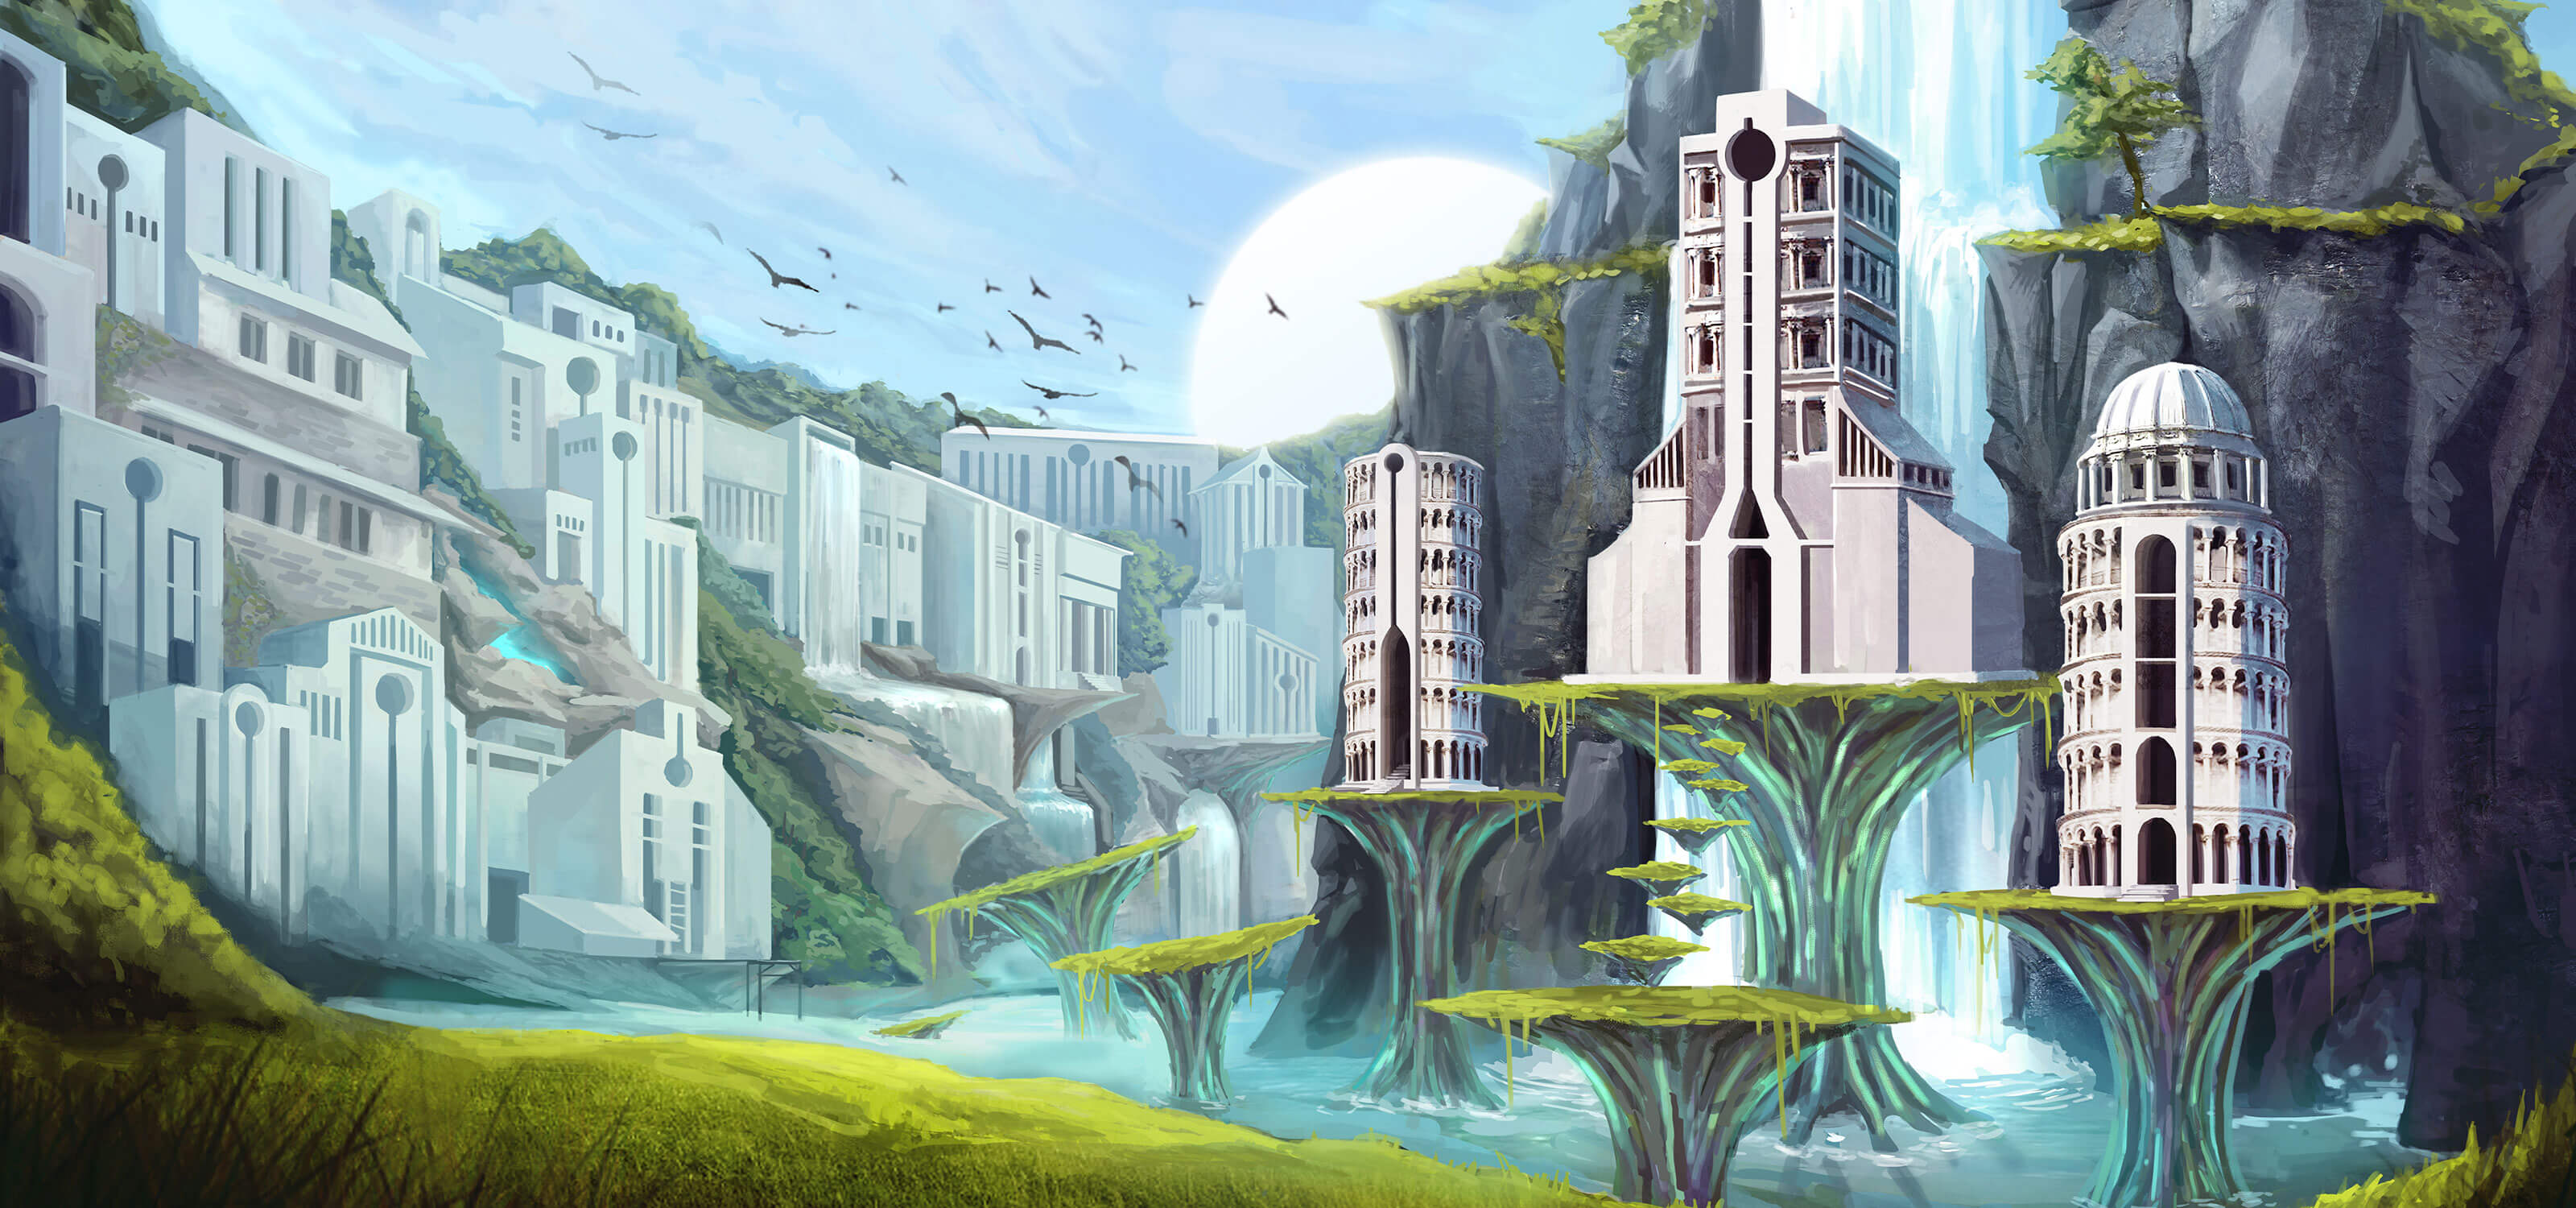 Futuristic Romanesque structures in an alien landscape by a waterfall.